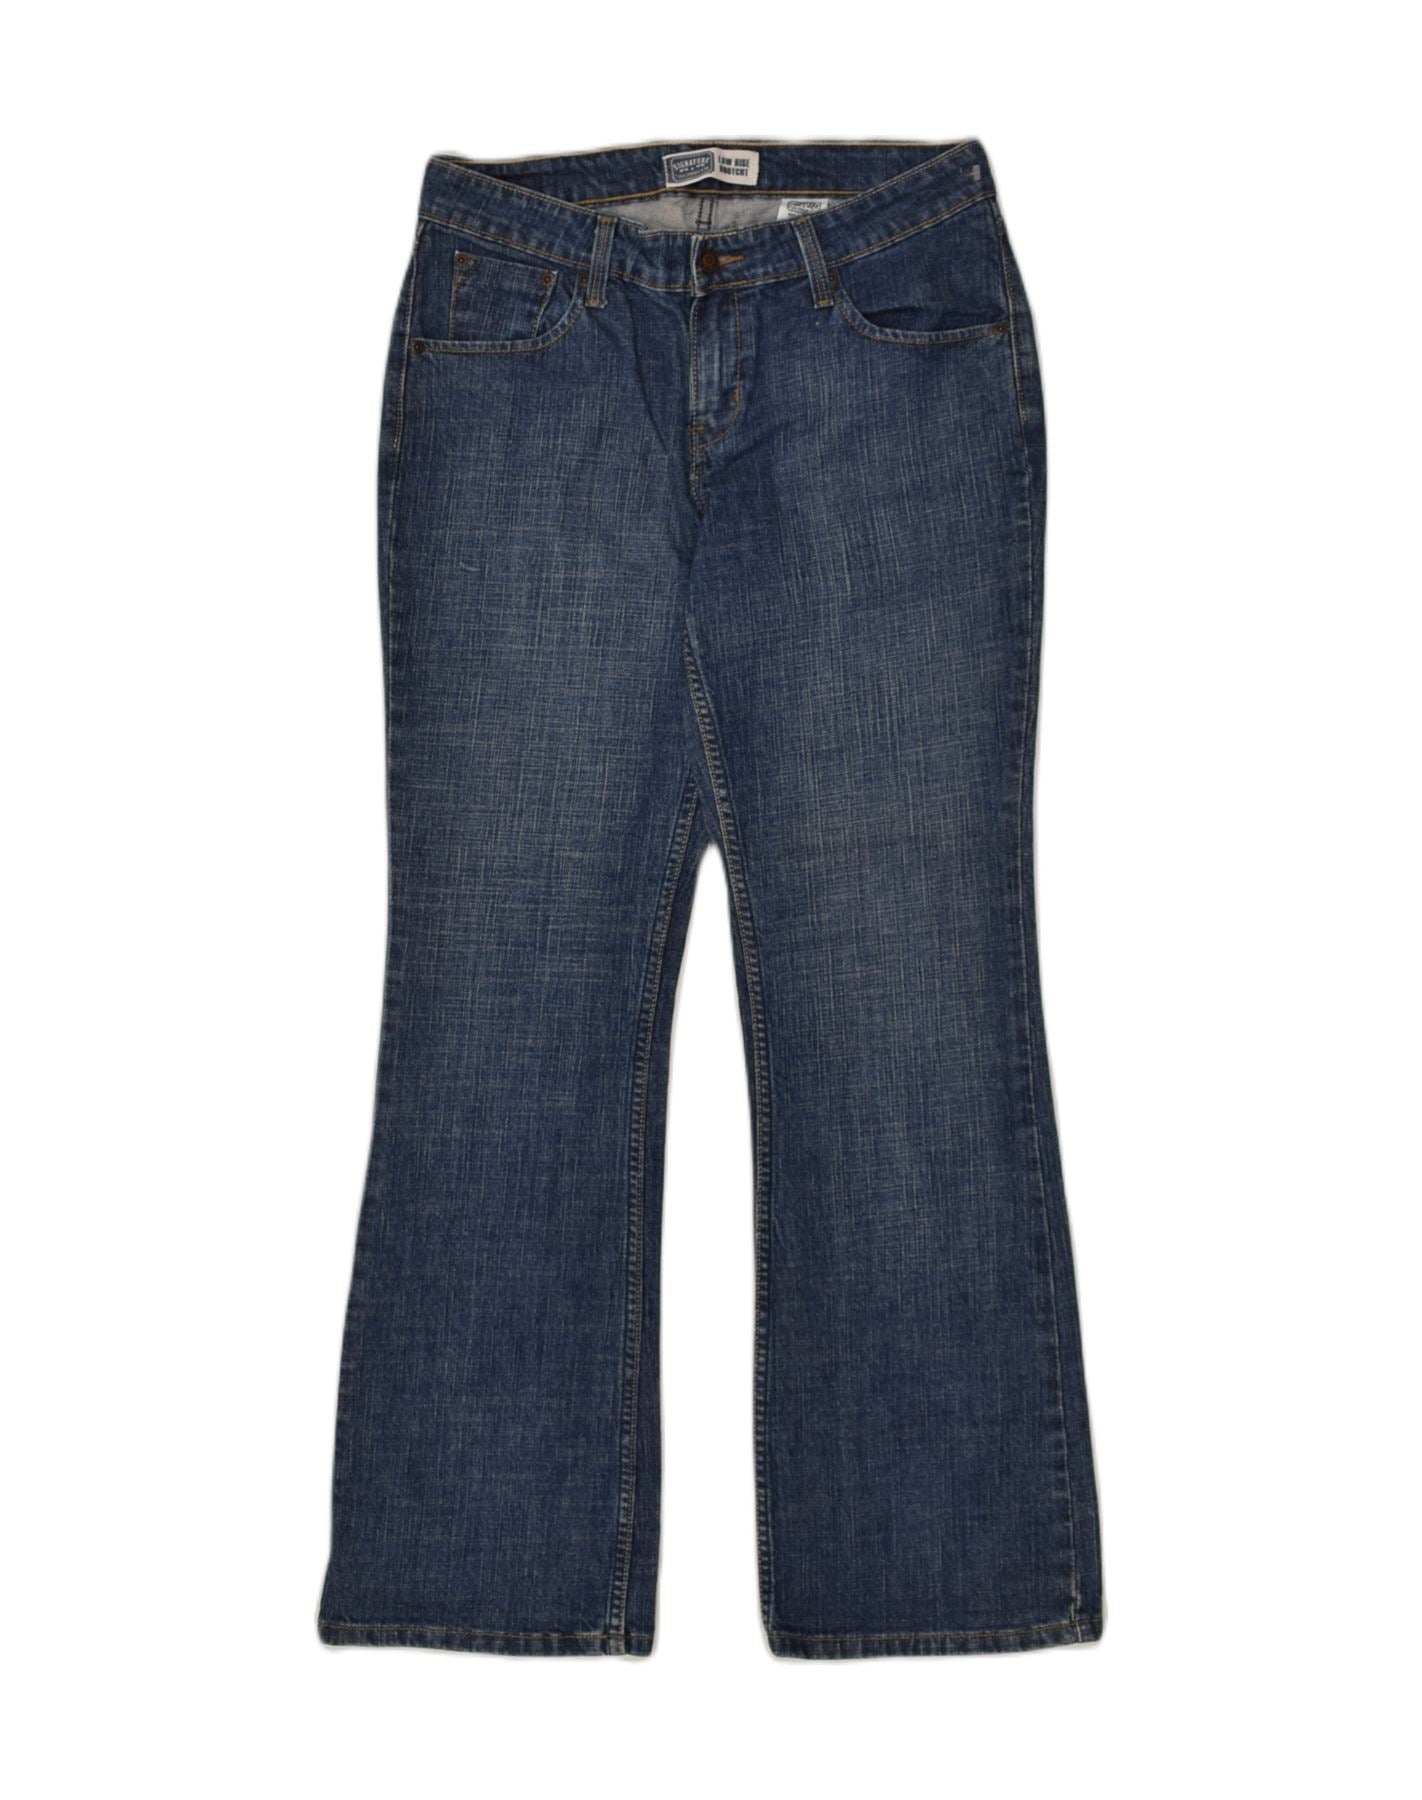 MOSSIMO Womens Mid Rise Skinny Jeans W26 L28 Blue Cotton, Vintage &  Second-Hand Clothing Online